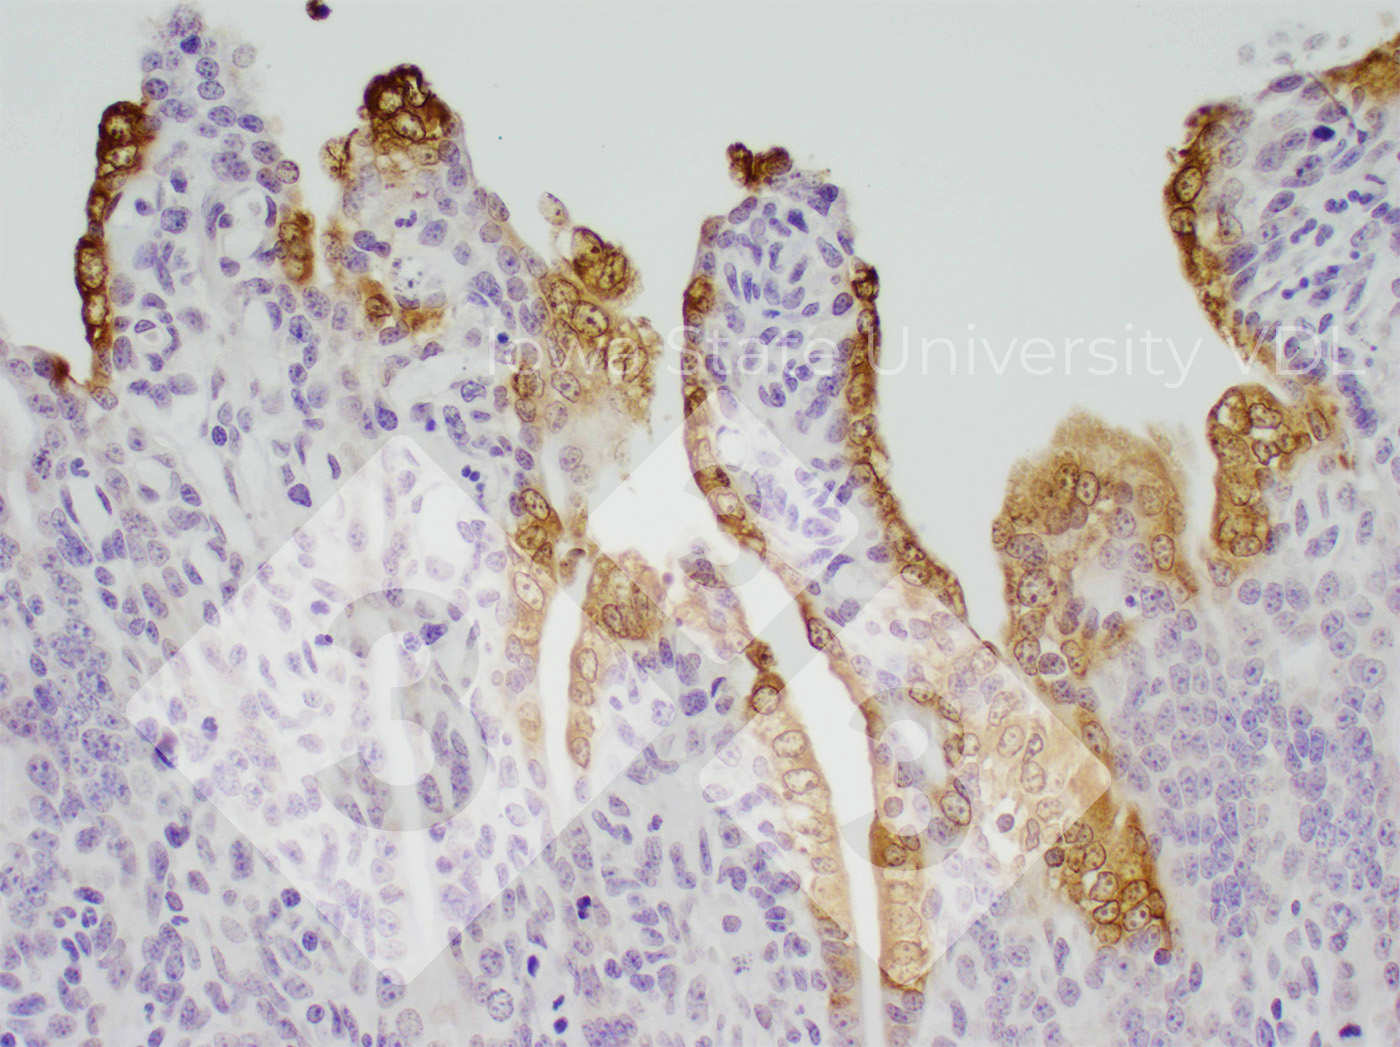 PED IHC staining of infected small intestine